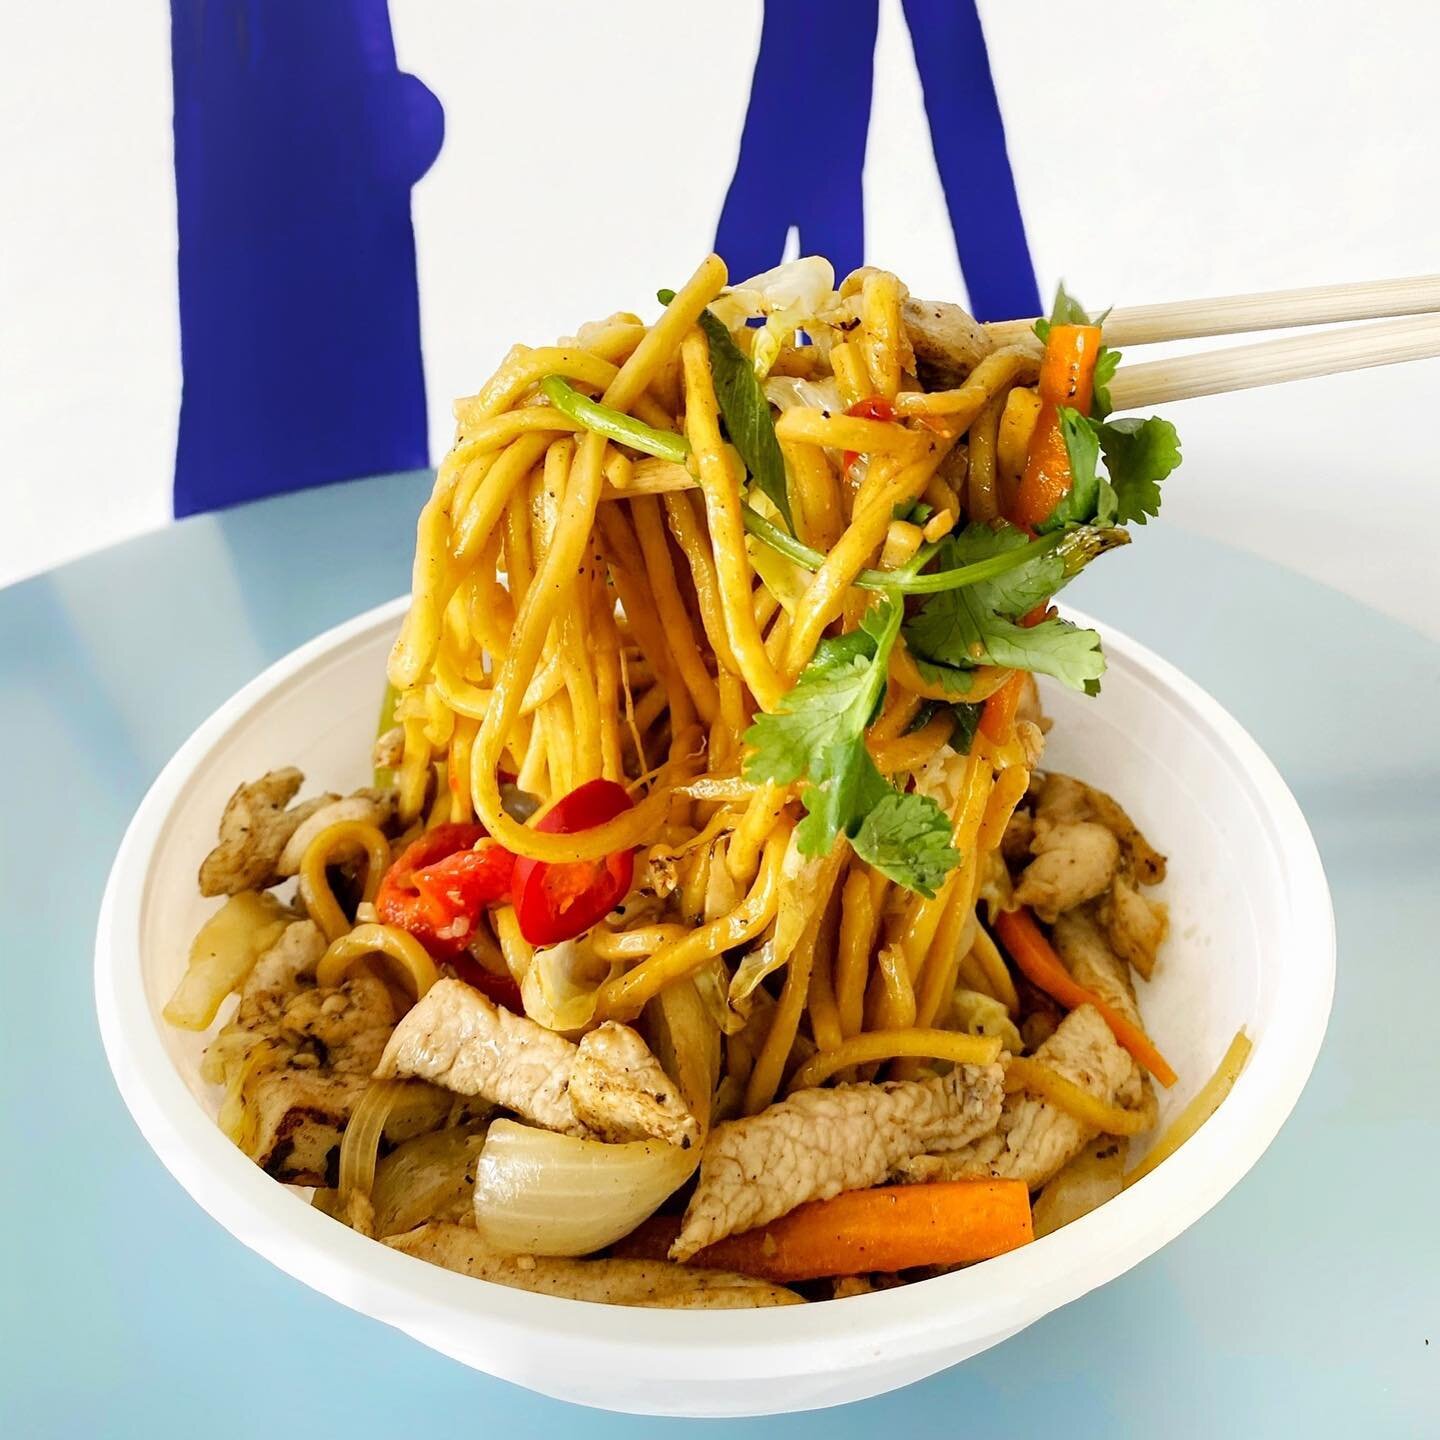 Have you tried our stir-fried egg noodles? We introduced them last week to offer take-home meals for lockdown but may keep them around for a little longer... 🥸